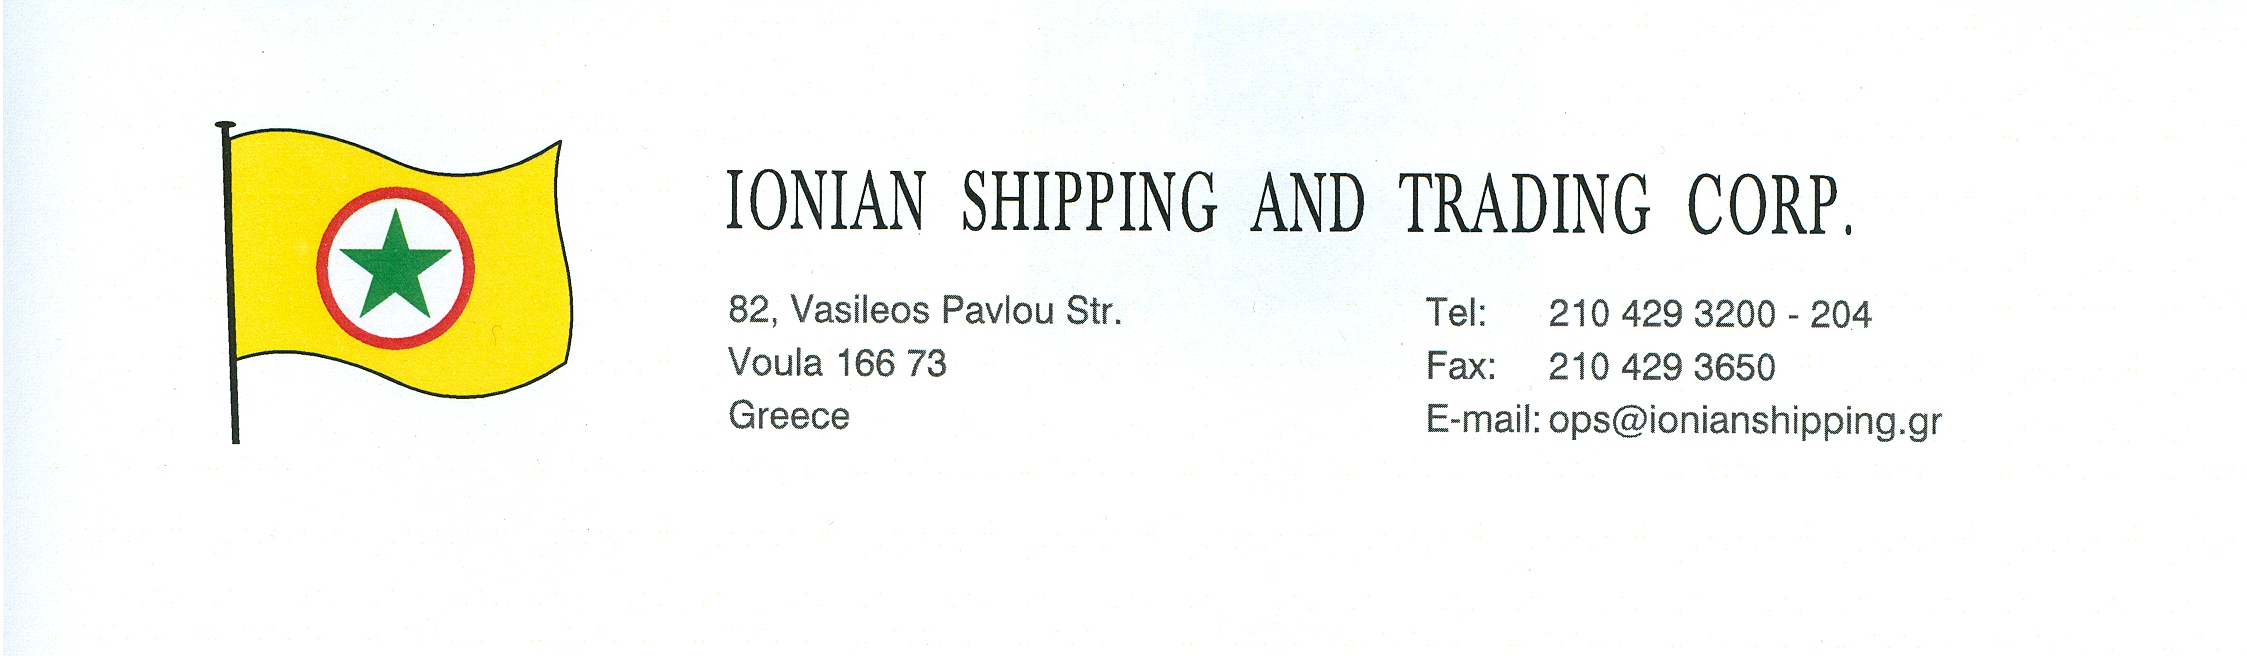 IONIAN SHIPPING AND TRADING CORP